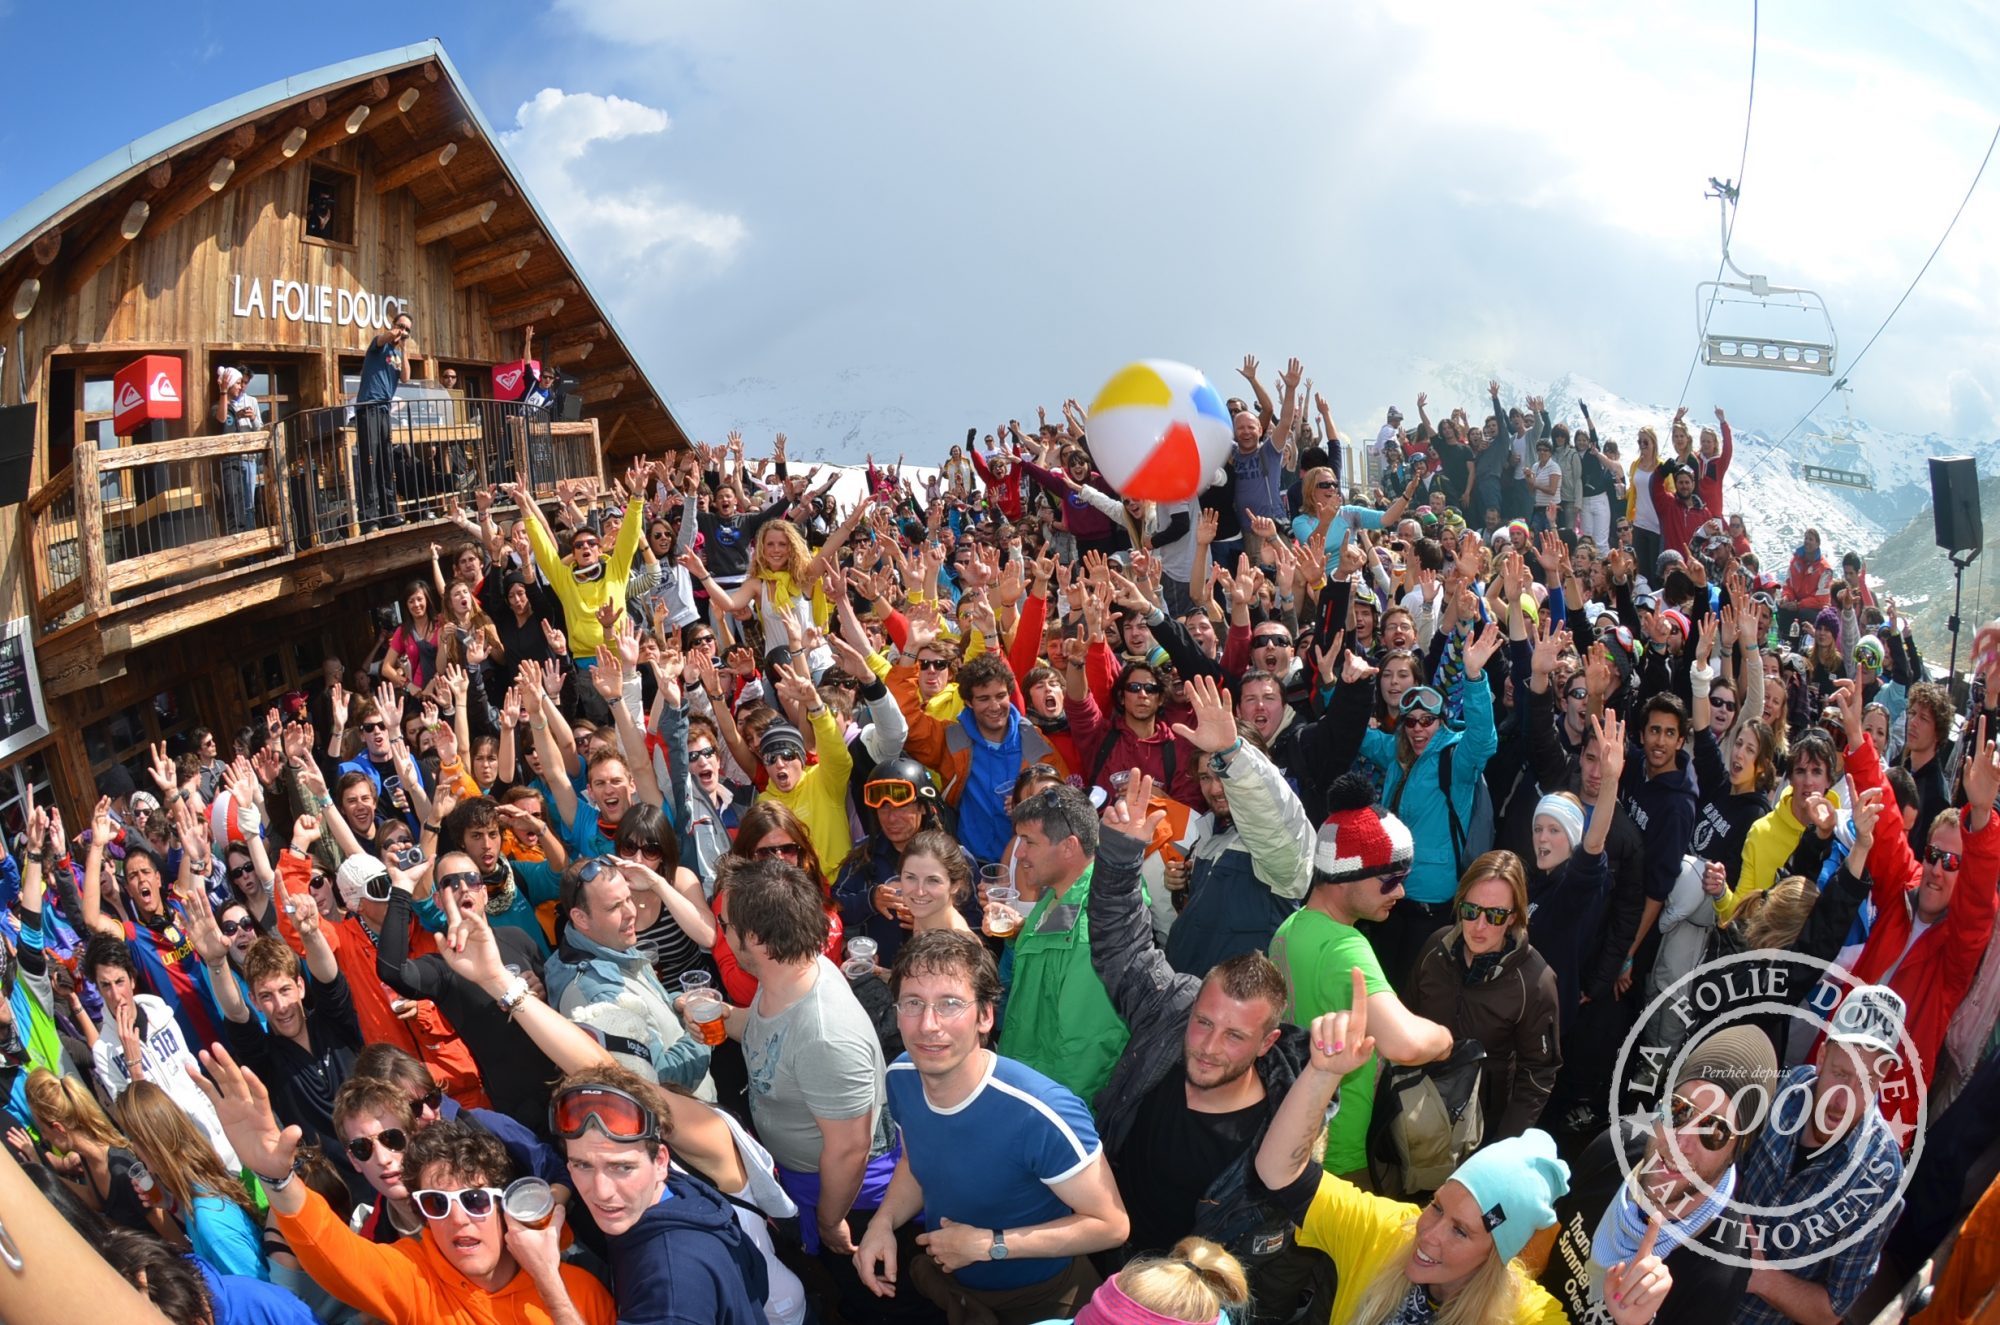 If you are after a hefty après-ski scene, look no further and go to La Folie Douce. Photo: TO Val Thorens. What is new for Val Thorens for 2019/20.